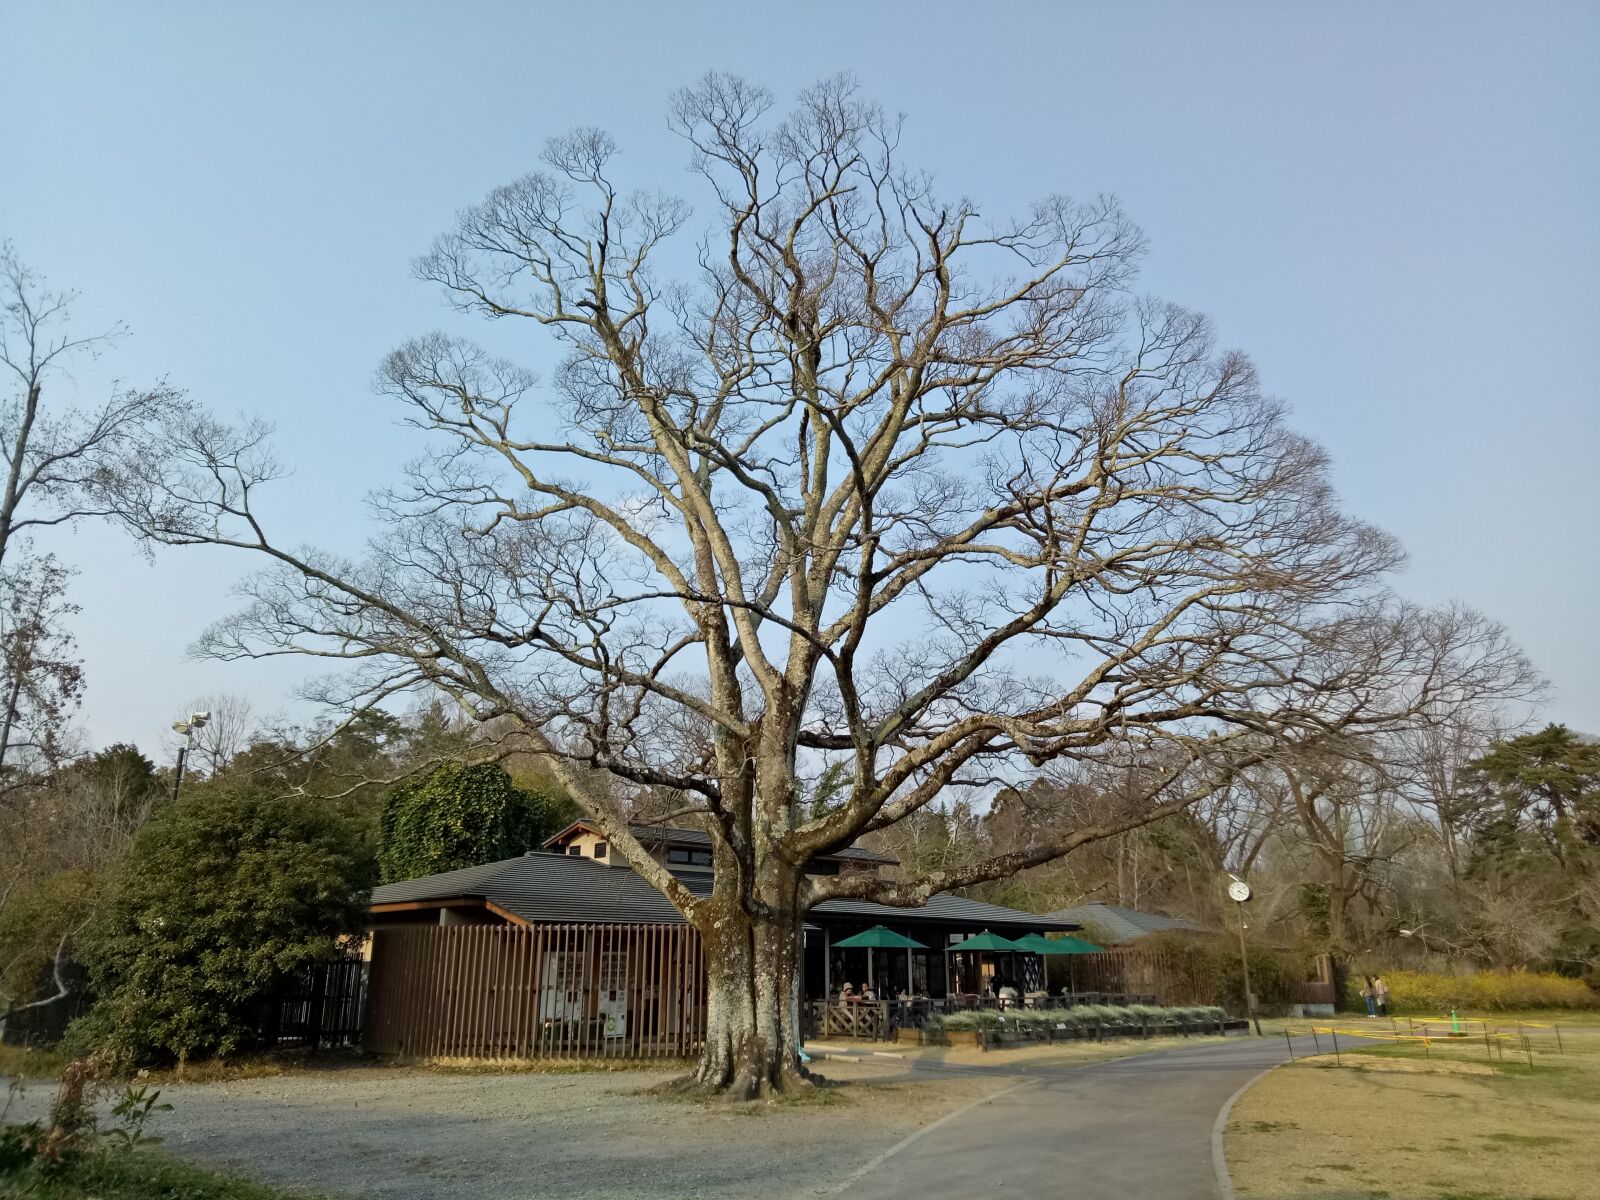 OPPO A1601 sample photo. Tree, no leaves, nature photography